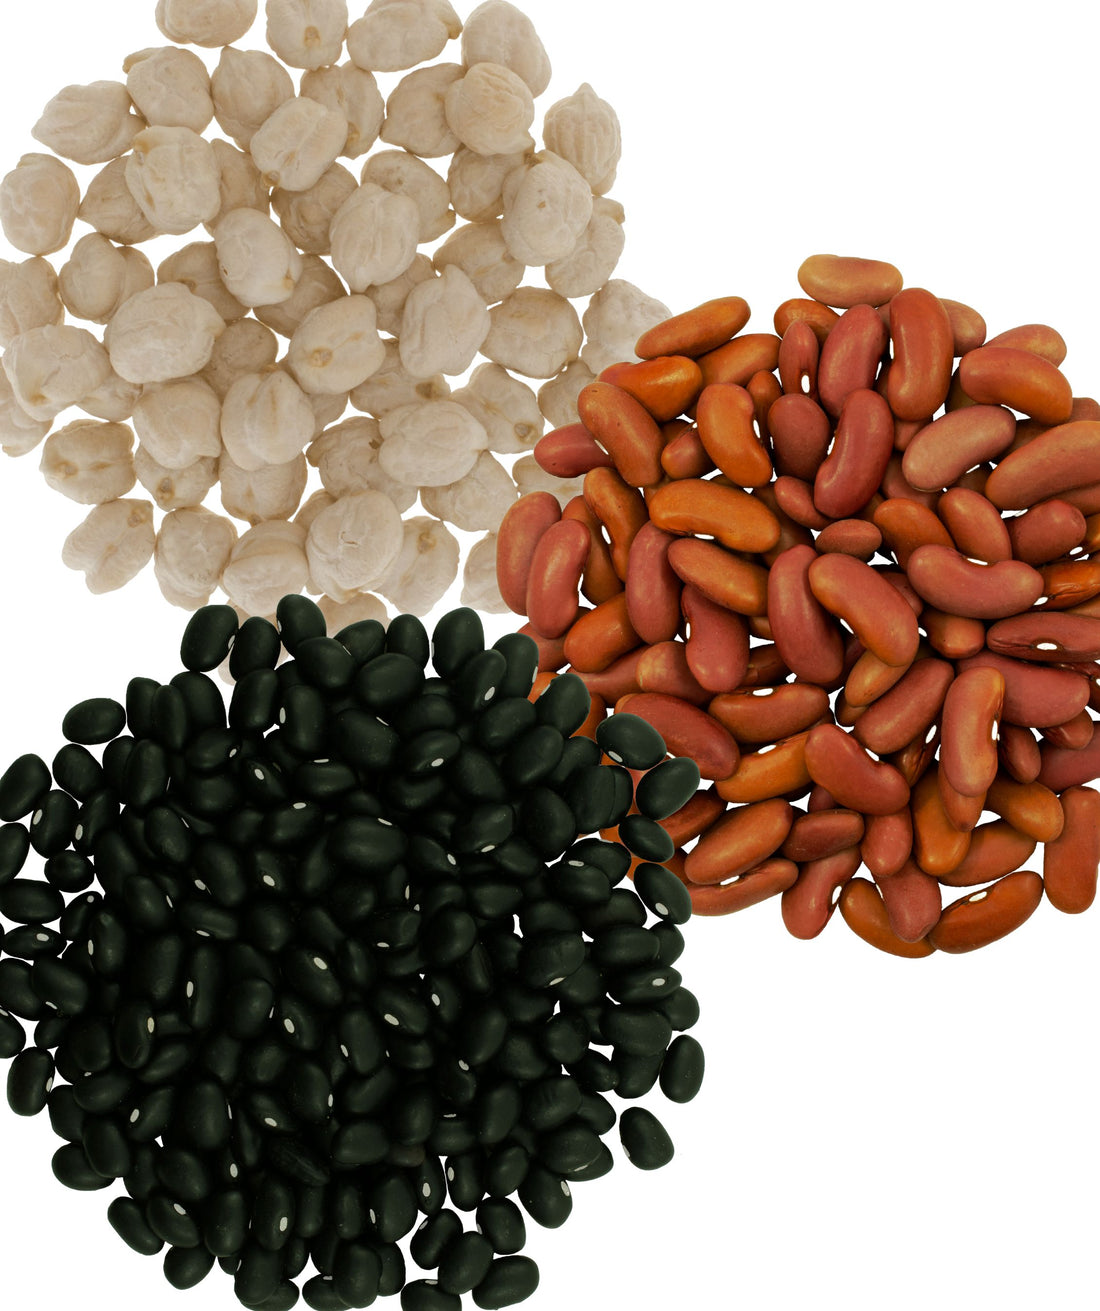 Clear Creek and Palouse Brand 11 LB Bundle: 4 LBS Black Beans, 4 LBS Light Red Kidney Beans, 3 LBS Chickpeas